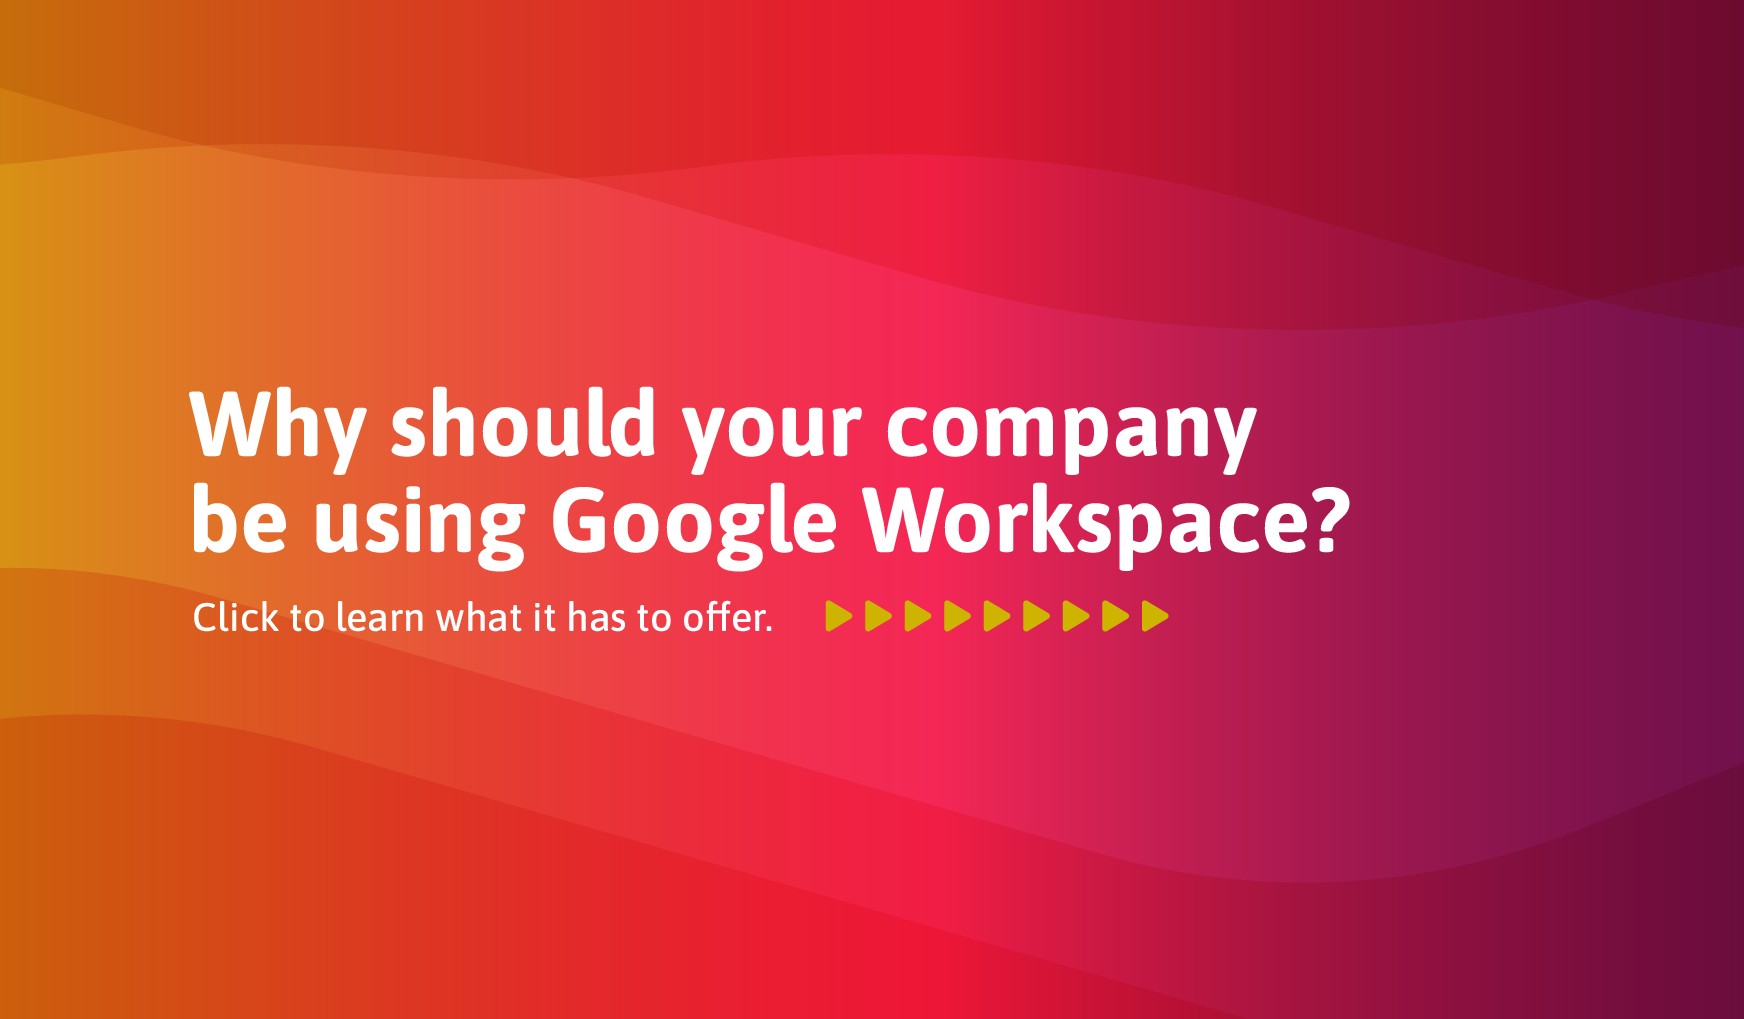 Why should your company be using Google Workspace?